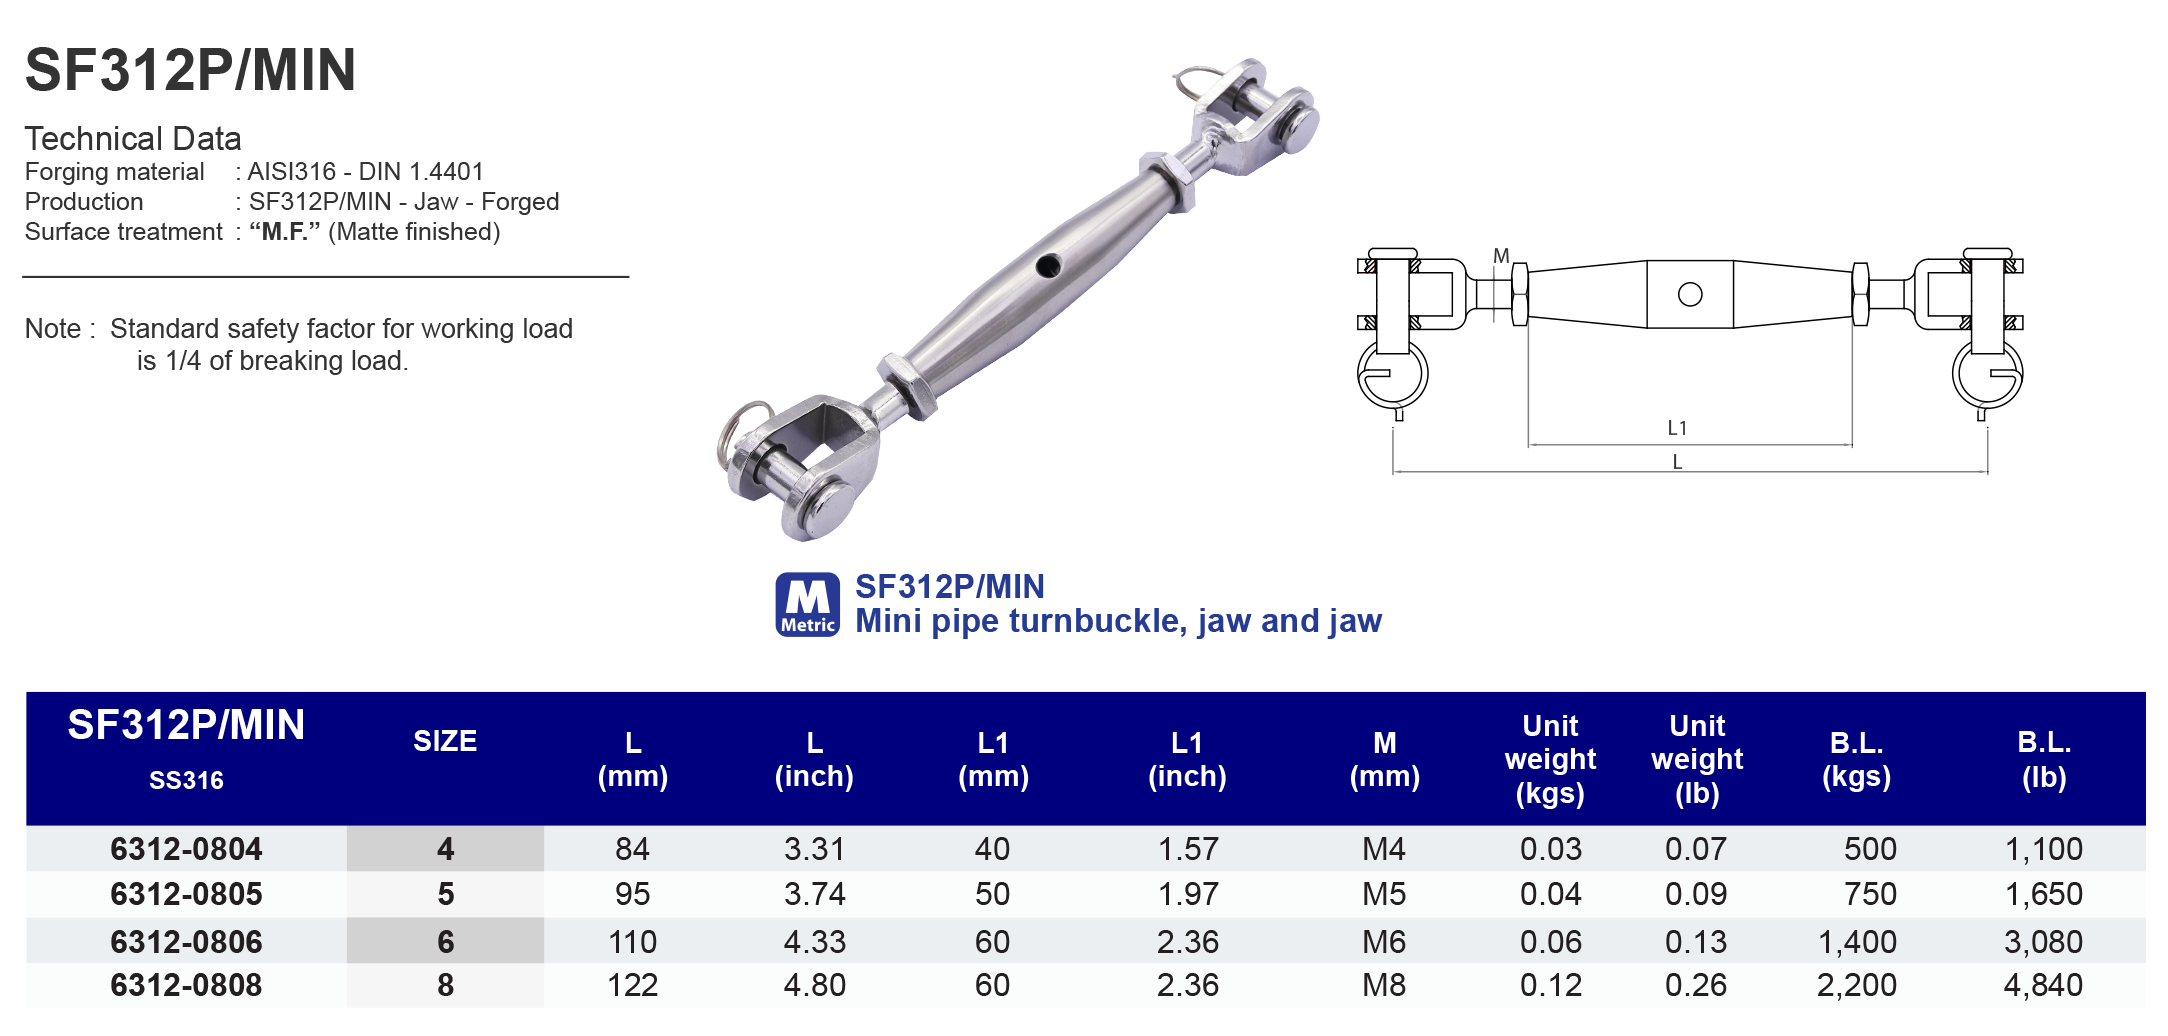 SF312P/MIN Mini pipe turnbuckle jaw and jaw - 316